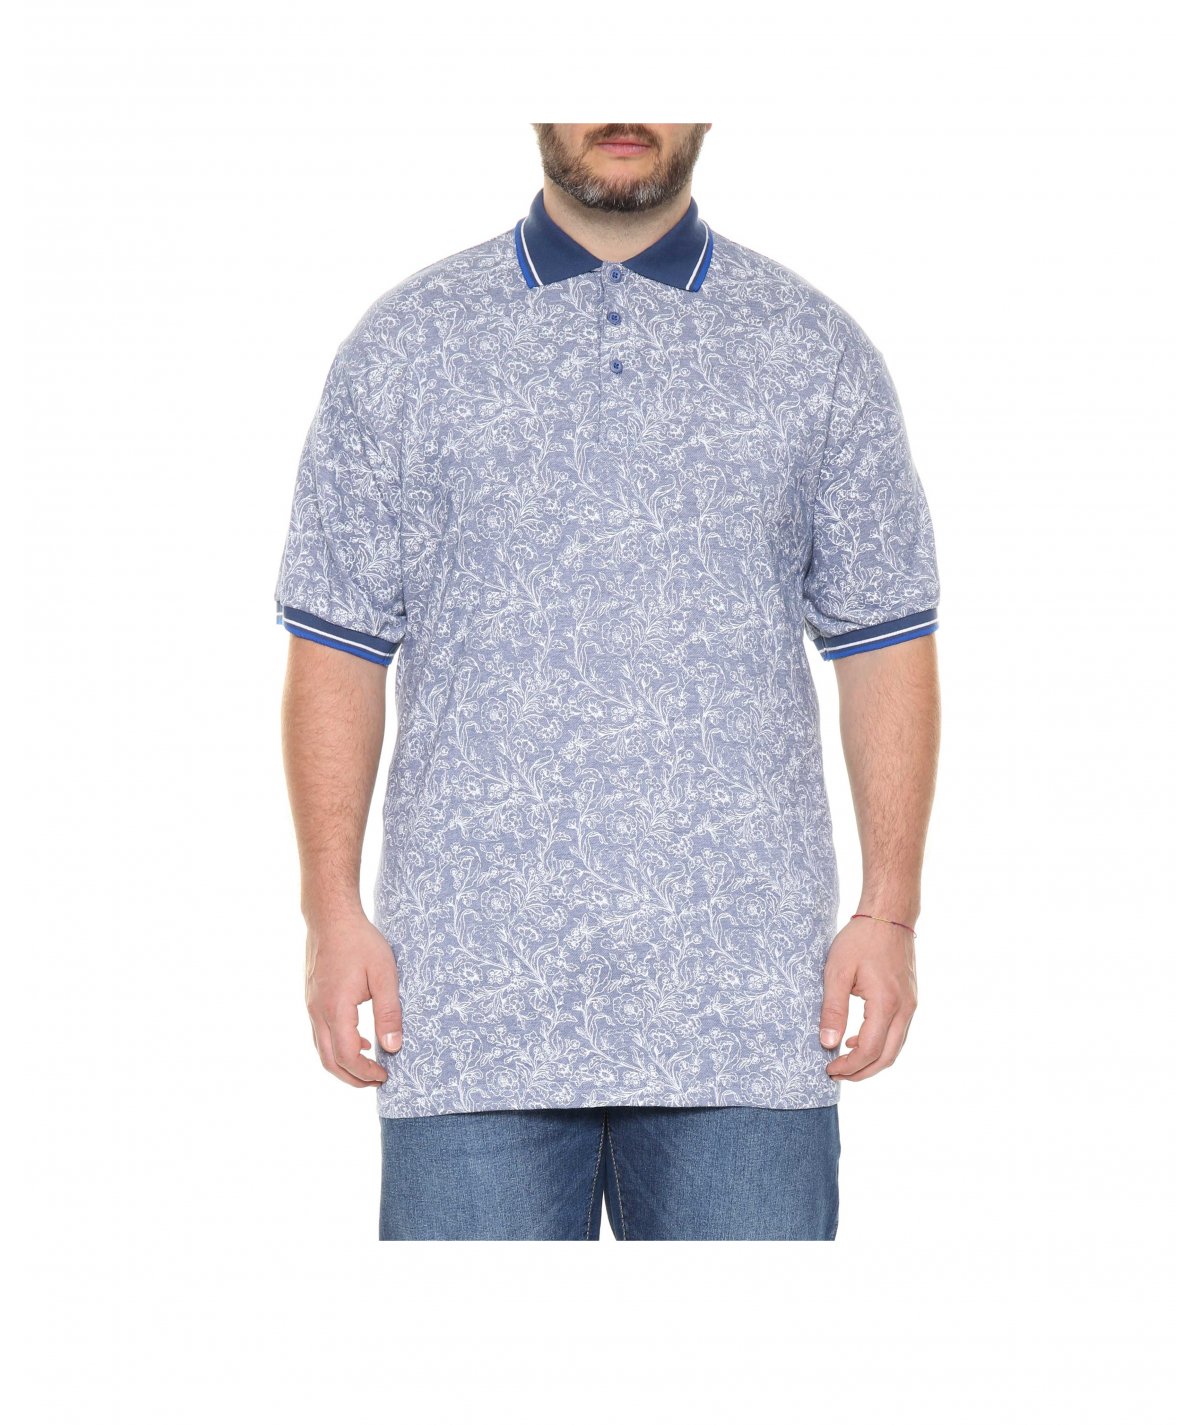 EASY BY MAXFORT PLUS SIZES SHORT SLEEVE